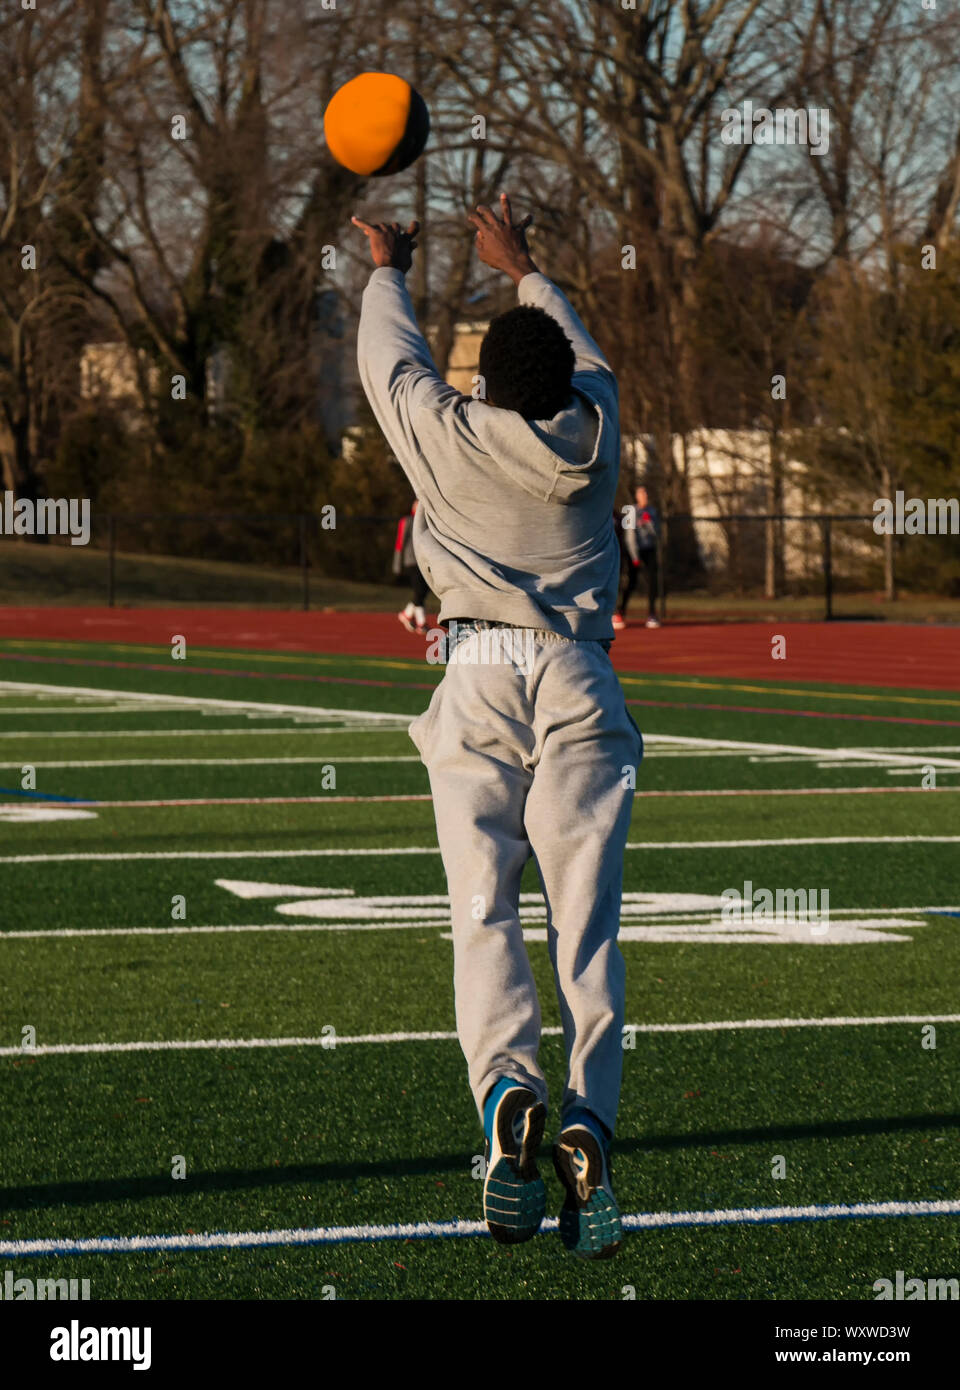 An African american male track and field athlete is tossing a medicine ball forward as he jumps forward as part of strength and speed training. Stock Photo